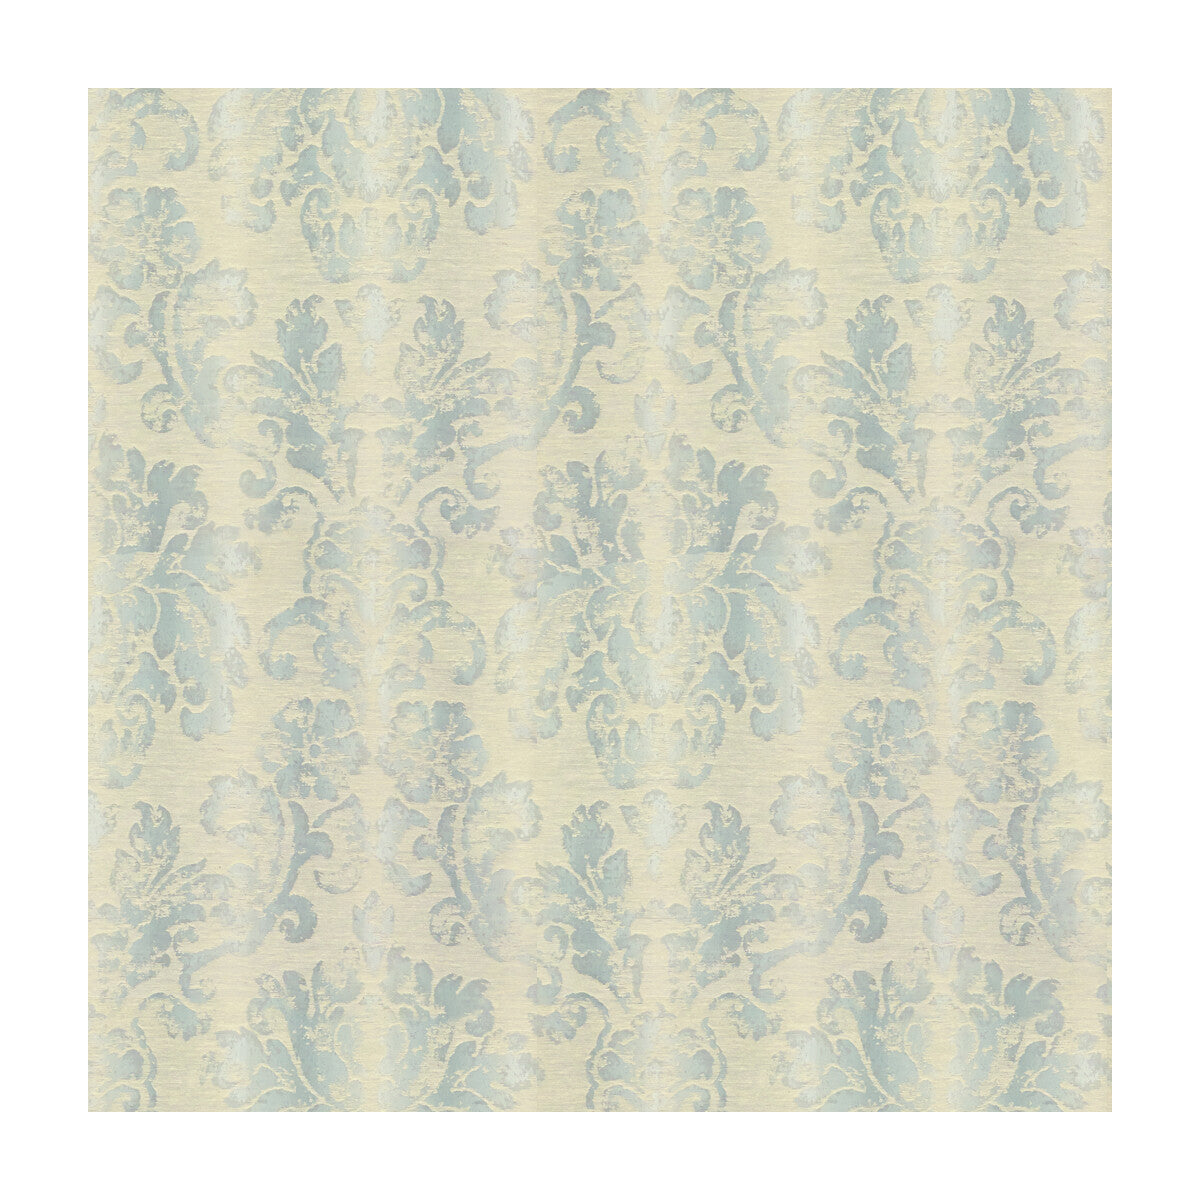 Wessex fabric in aqua color - pattern 2015145.13.0 - by Lee Jofa in the Aerin 2 collection